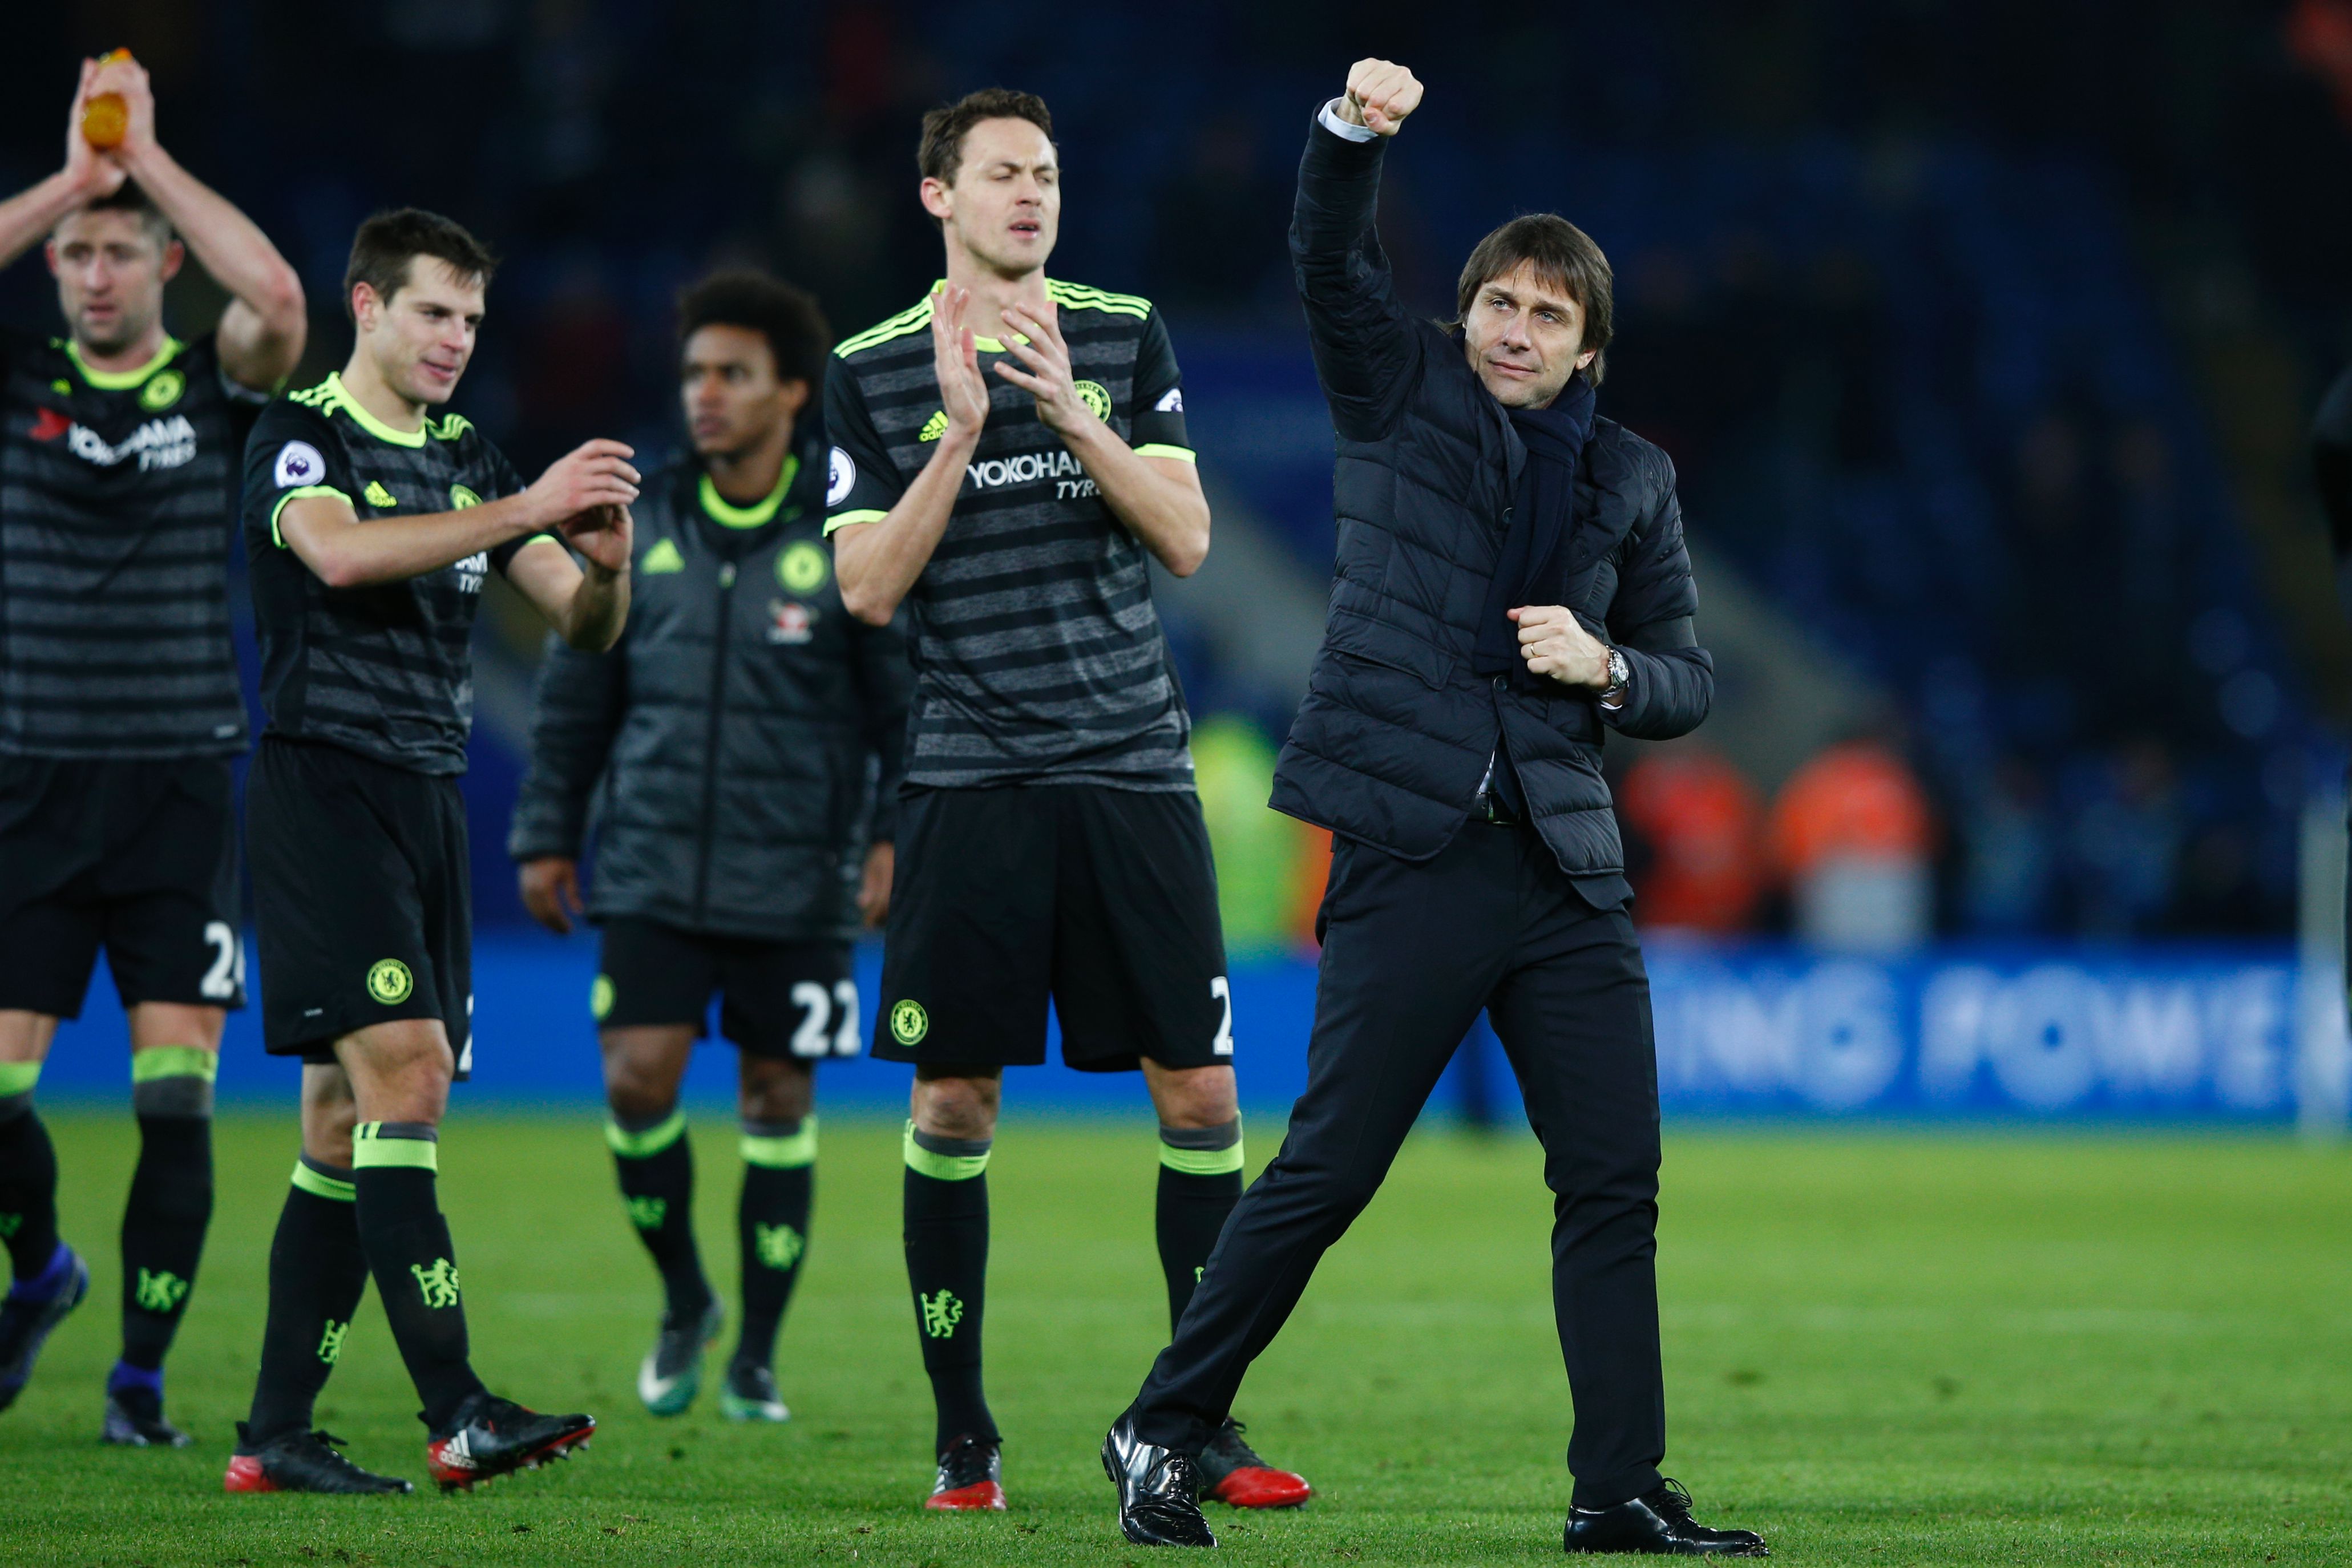 Chelsea's Italian head coach Antonio Conte (R) celebrates with his players on the pitch after the English Premier League football match between Leicester City and Chelsea at King Power Stadium in Leicester, central England on January 14, 2017.
Cheslea won the game 3-0. / AFP / Adrian DENNIS / RESTRICTED TO EDITORIAL USE. No use with unauthorized audio, video, data, fixture lists, club/league logos or 'live' services. Online in-match use limited to 75 images, no video emulation. No use in betting, games or single club/league/player publications.  /         (Photo credit should read ADRIAN DENNIS/AFP/Getty Images)